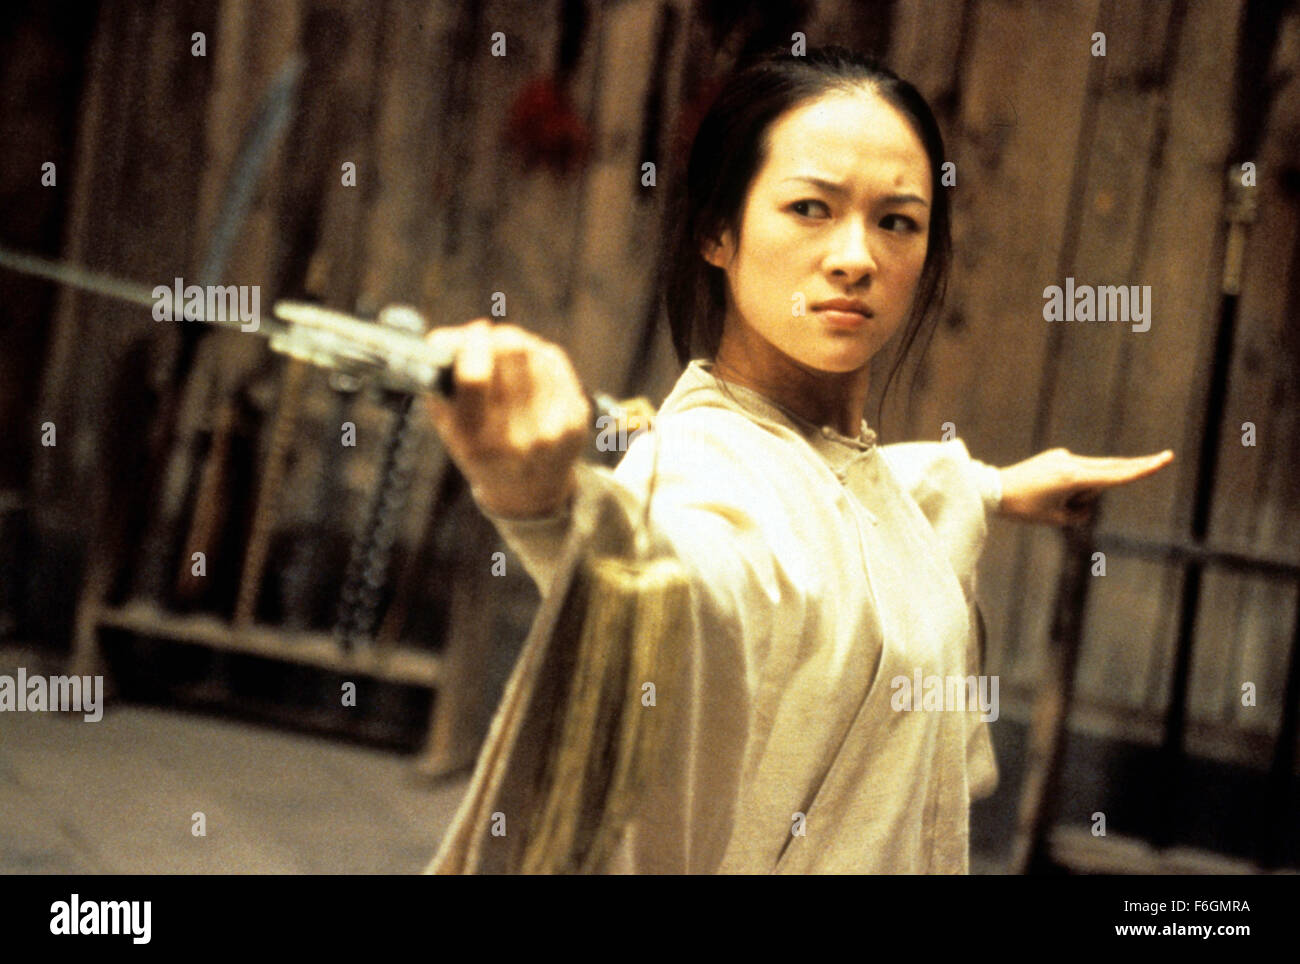 RELEASE DATE: December 22, 2000. MOVIE TITLE: Crouching Tiger Hidden Dragon. STUDIO: United China Vision. PLOT: The disappearance of a magical jade sword spurs a breathtaking quest for the missing treasure. Li is embittered by the loss of his jade sword, and his unrequited pursuit of Yu is further complicated by the mysterious intrusion of an assassin. The identity of the assassin is gradually unveiled as another poignant tale of love begins to ravel with that of Li and Yu against the backdrop of Western China's magnificent landscape. PICTURED: ZIYI ZHANG as Jen Yu. Stock Photo